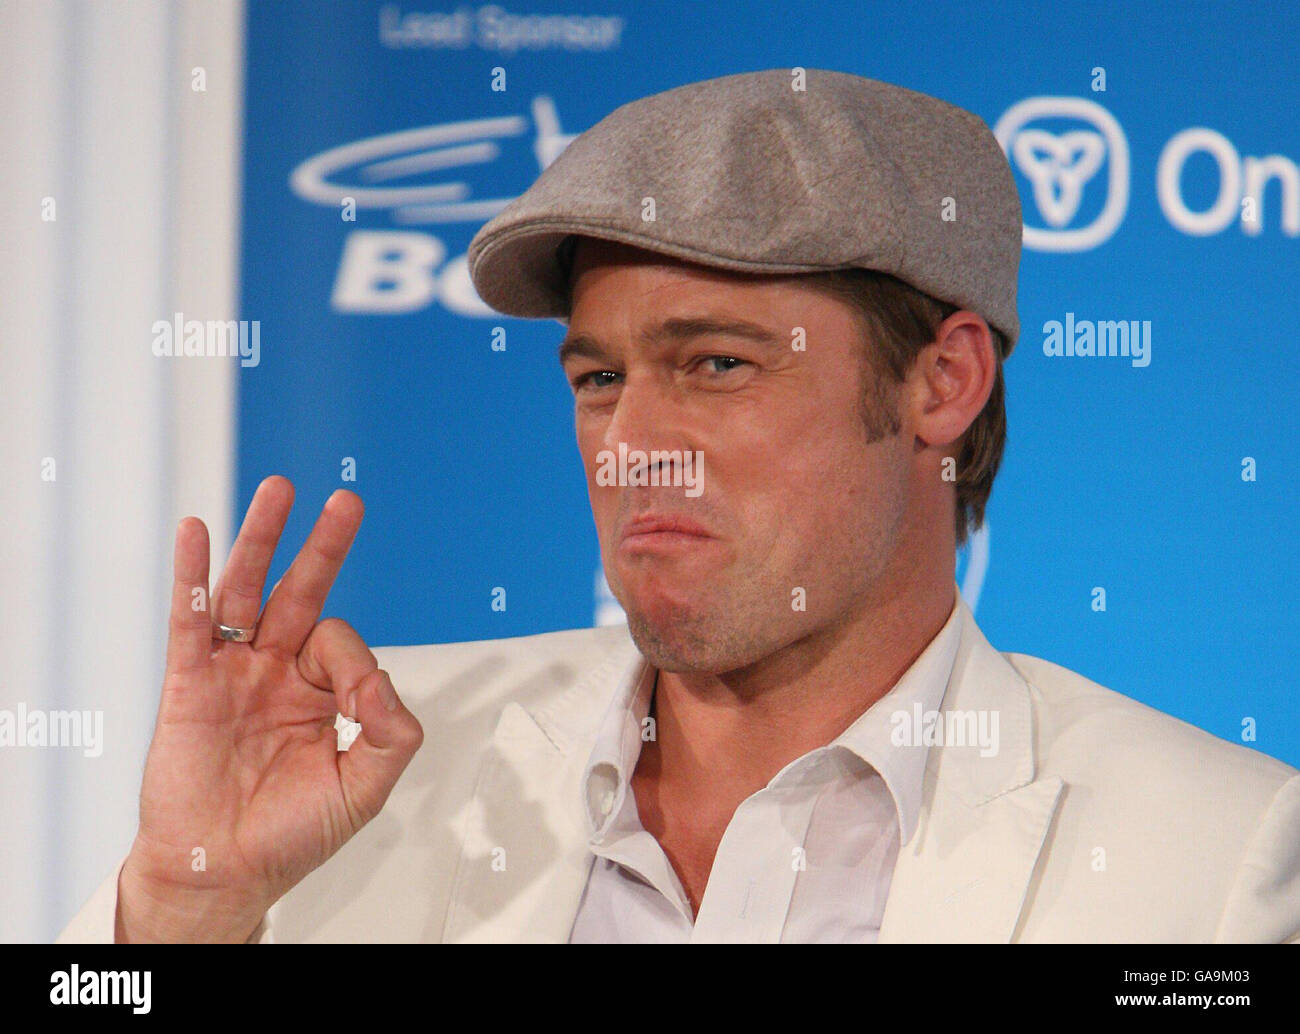 AP OUT: Brad Pitt is seen at a press conference for new film The Assasination of Jesse James, as part of the Toronto Film Festival, at the Four Seasons Hotel in Toronto, Canada. Picture date: September 8th, 2007. Stock Photo